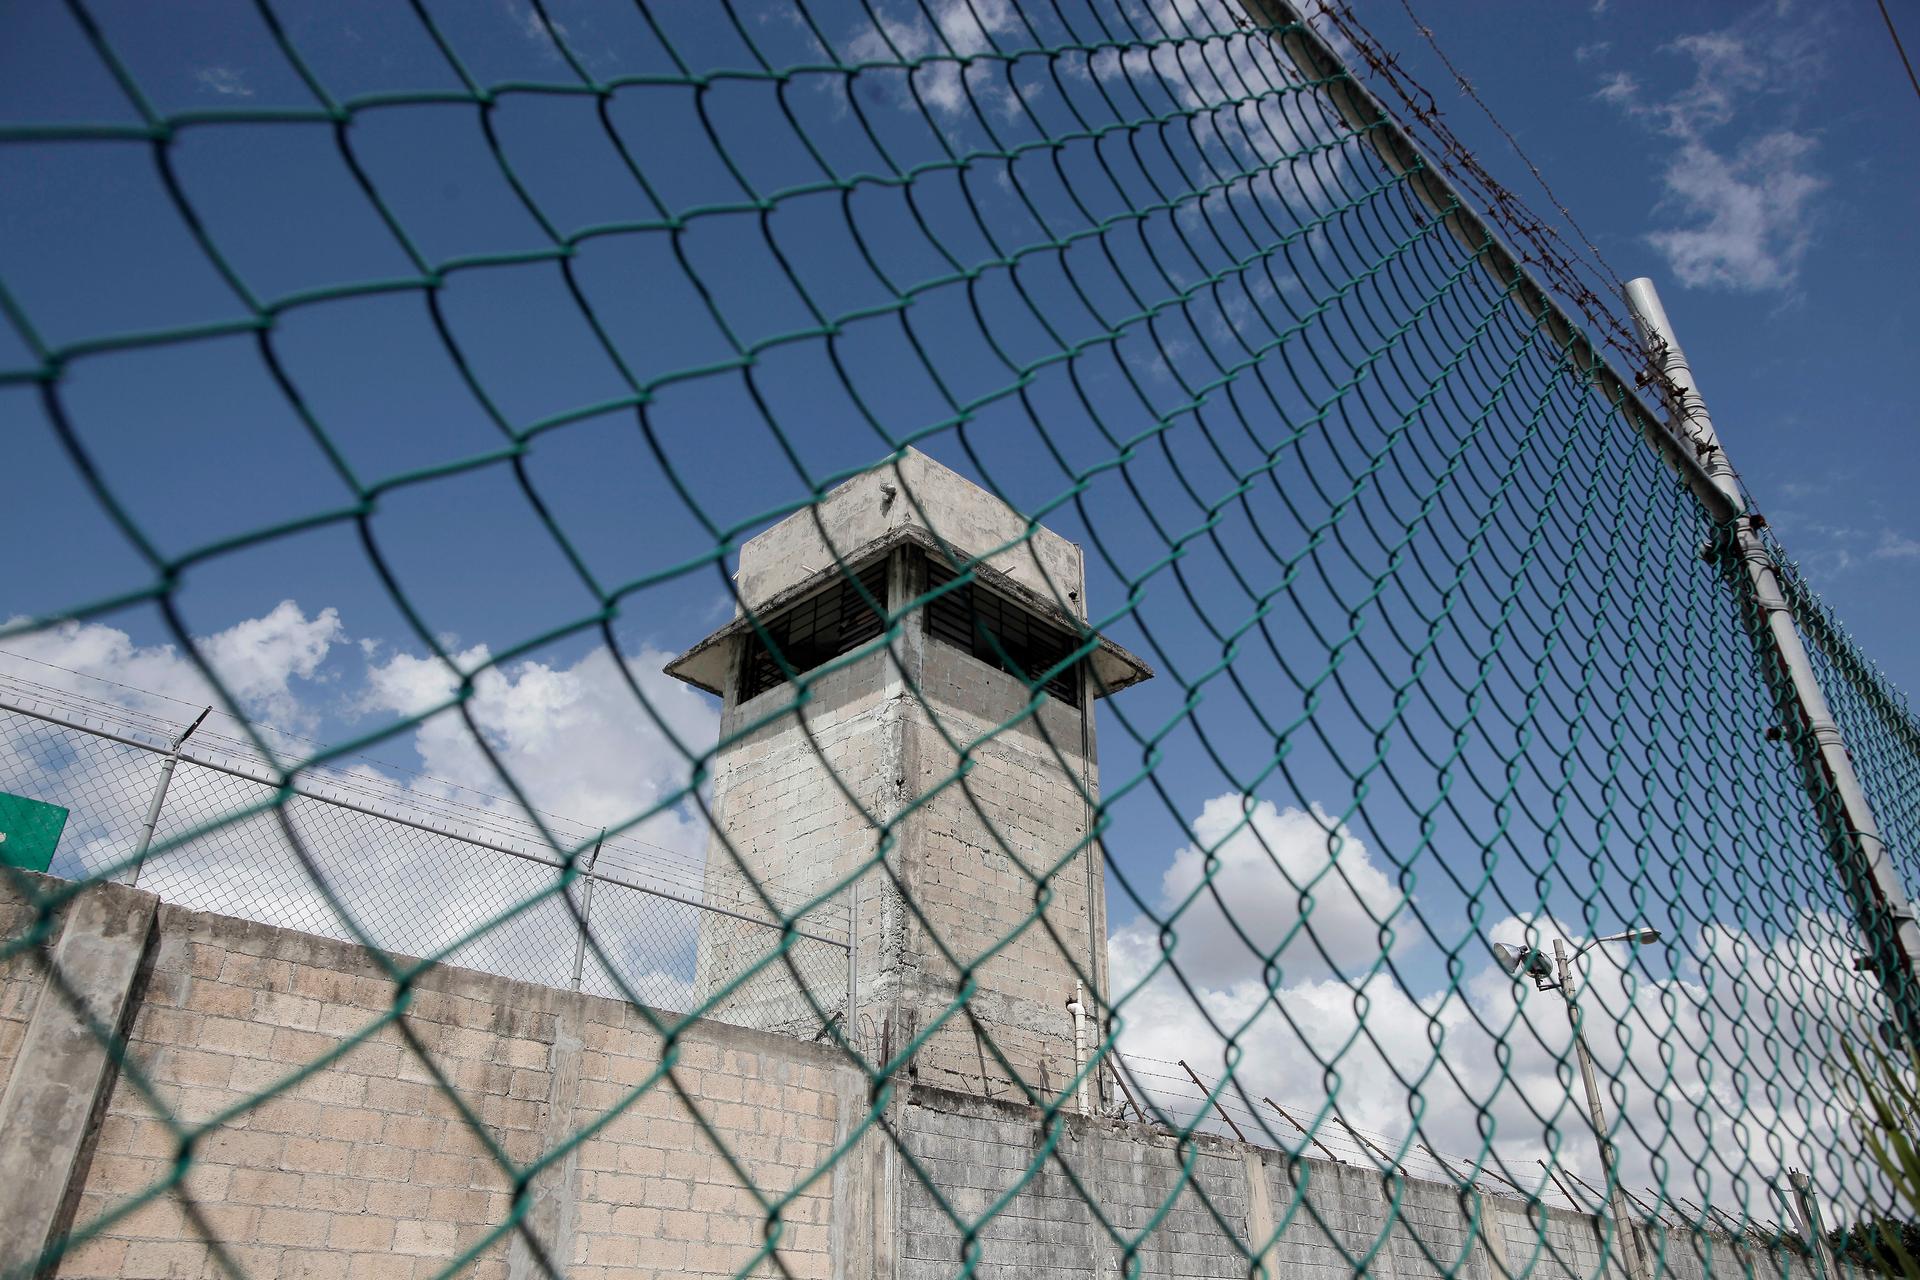 A watchtower from jail is seen from the street. March 13, 2015.